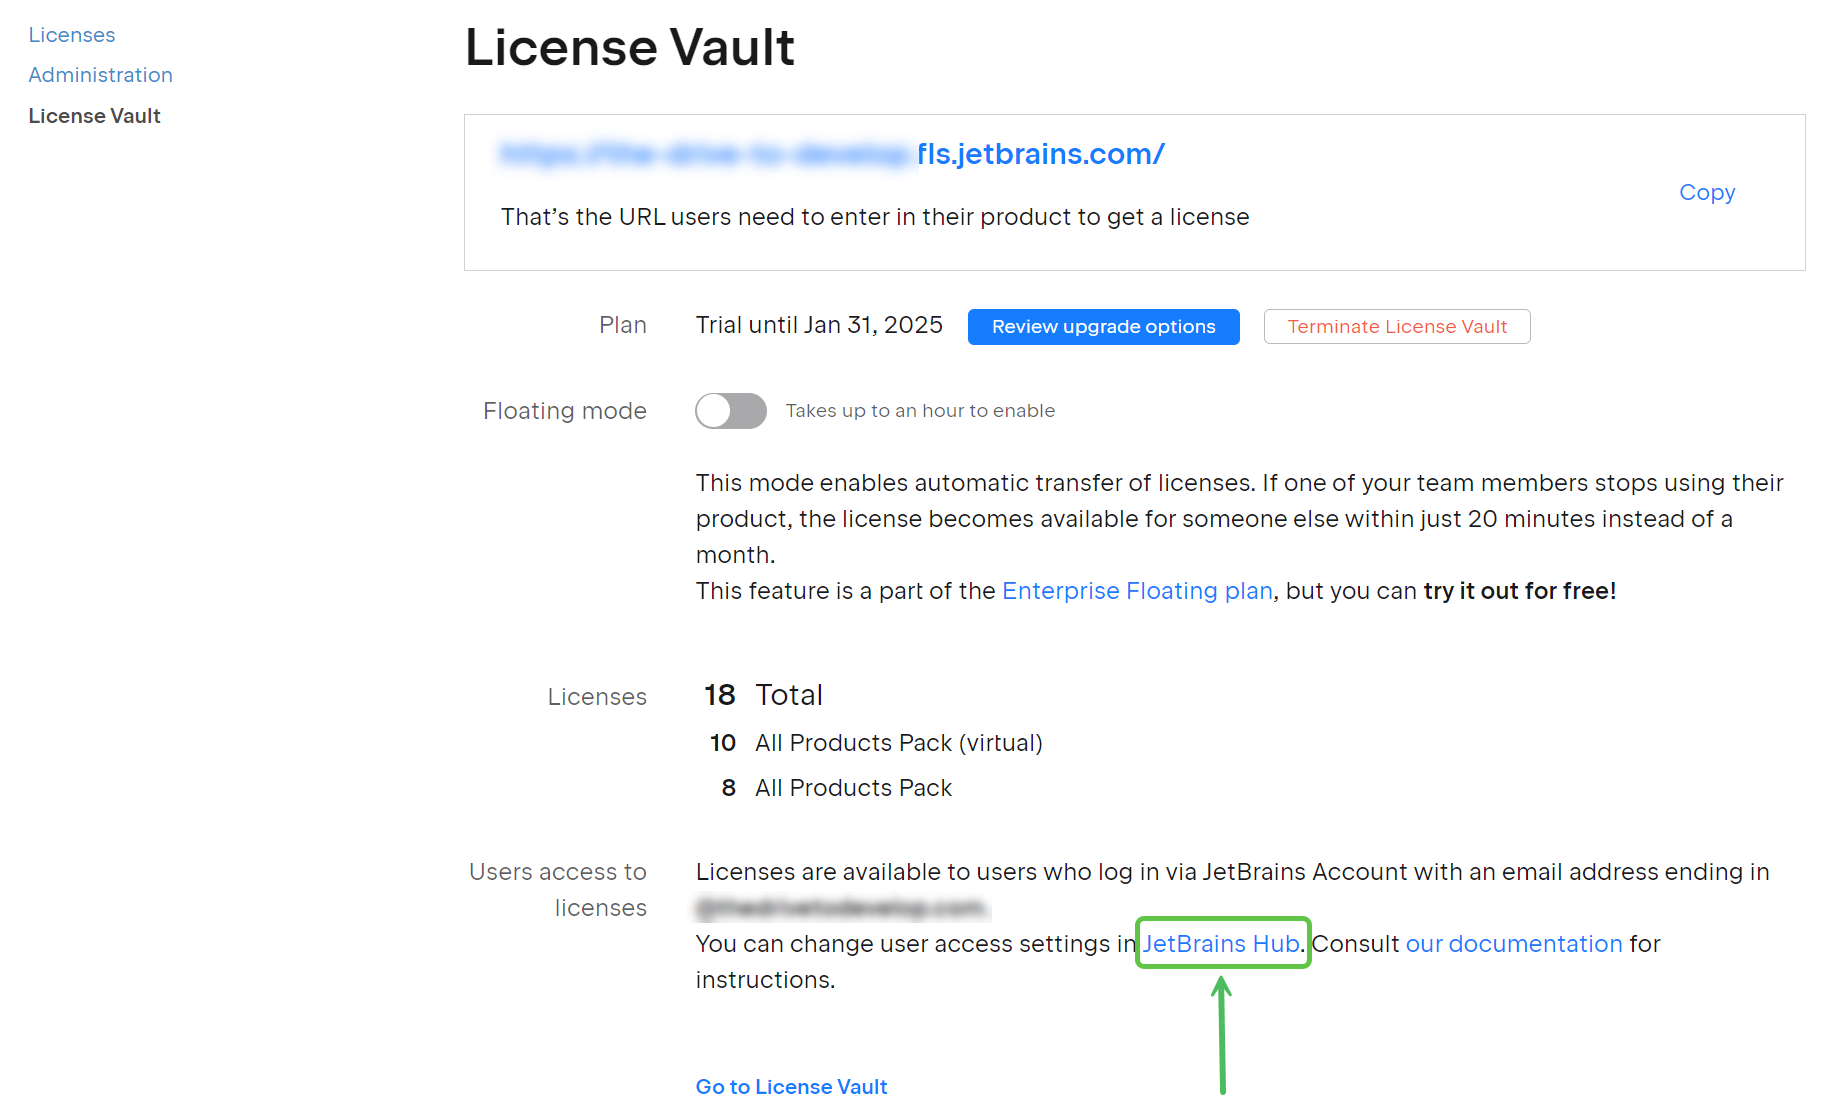 Link to JetBrains Hub in the License Vault settings page in JetBrains Account